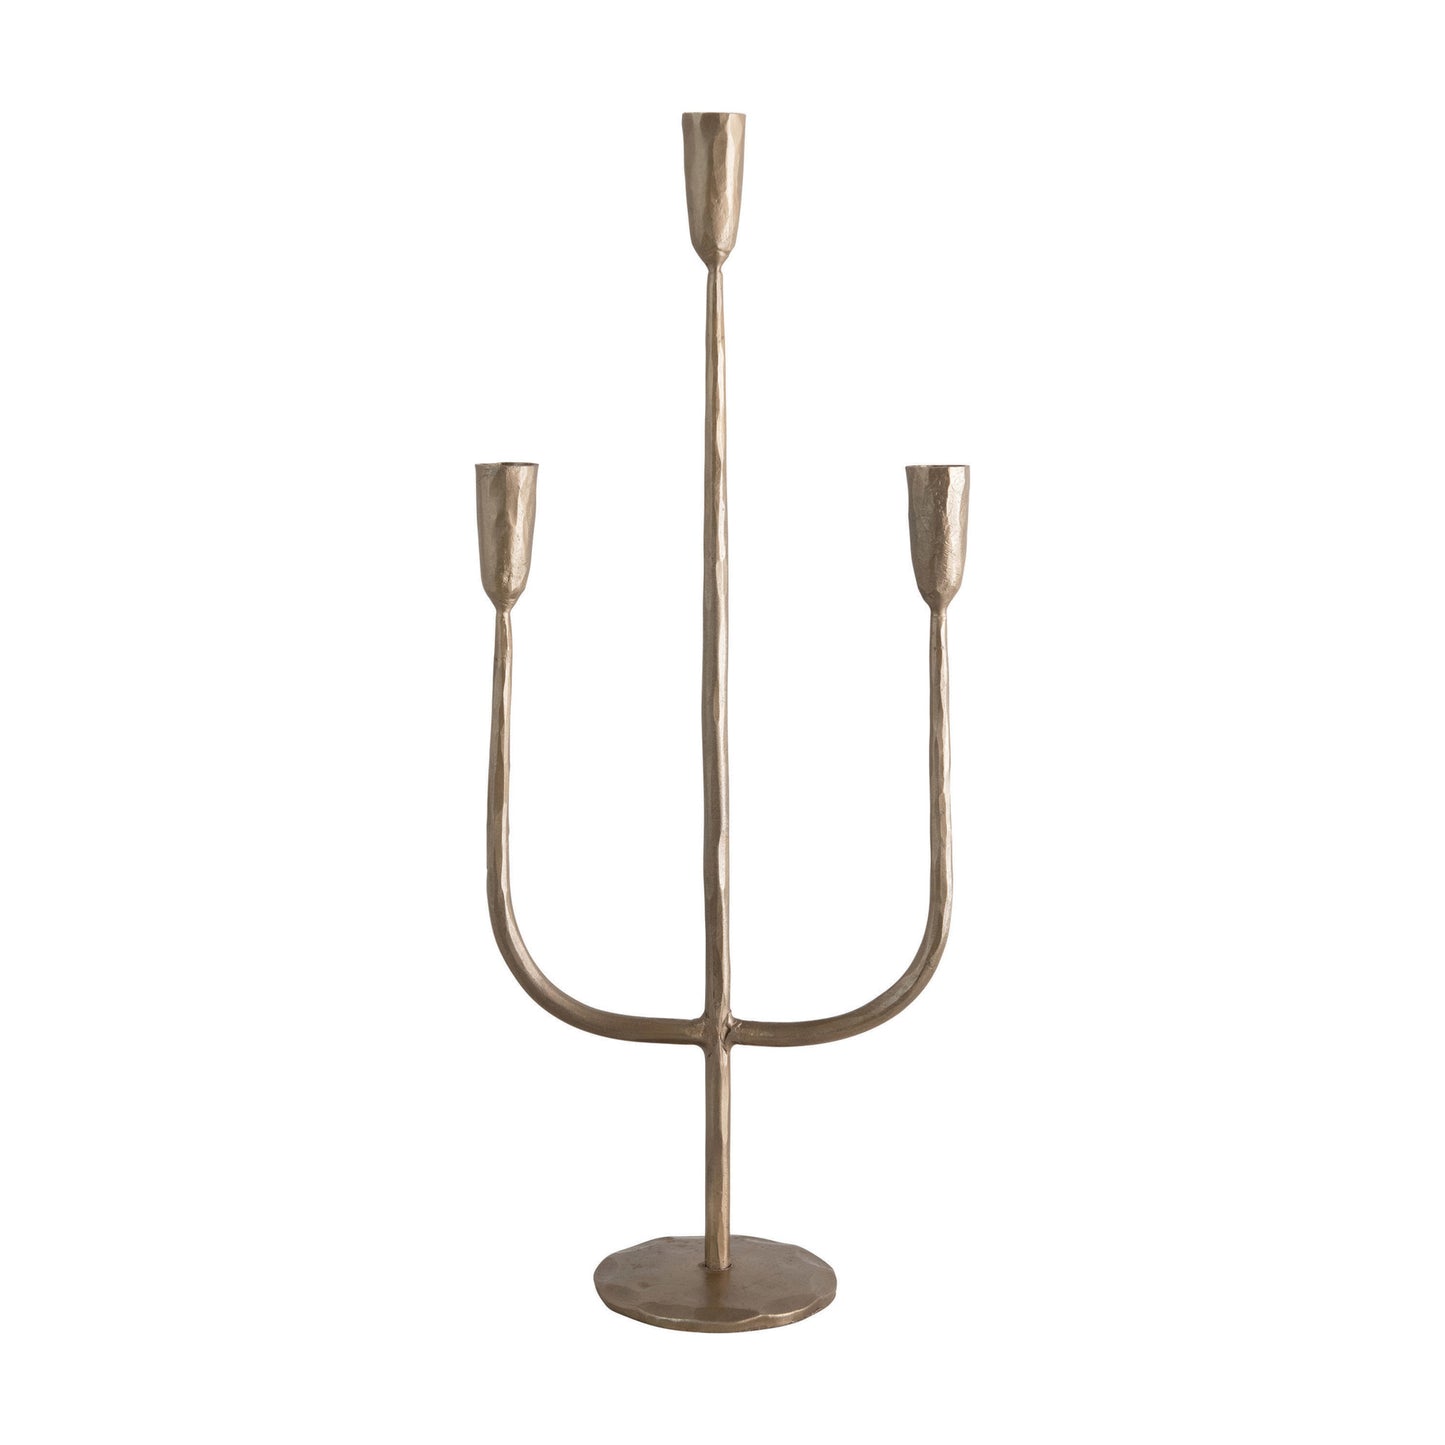 Candelabra with Antique Finish